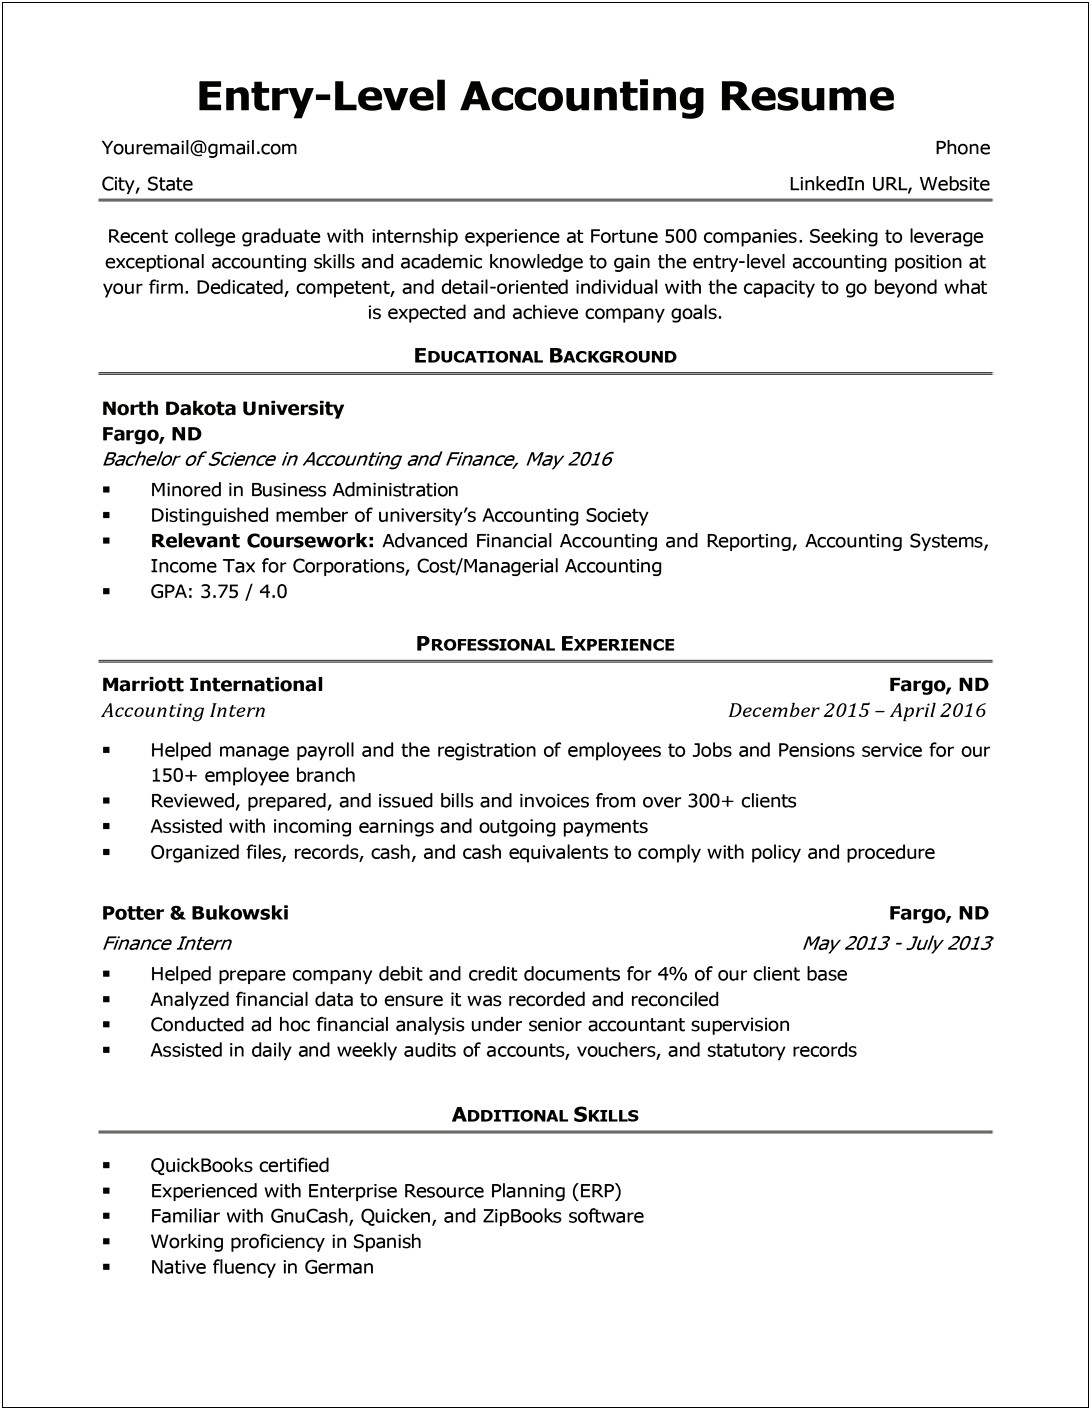 Sample Child Modeling Resume No Experience